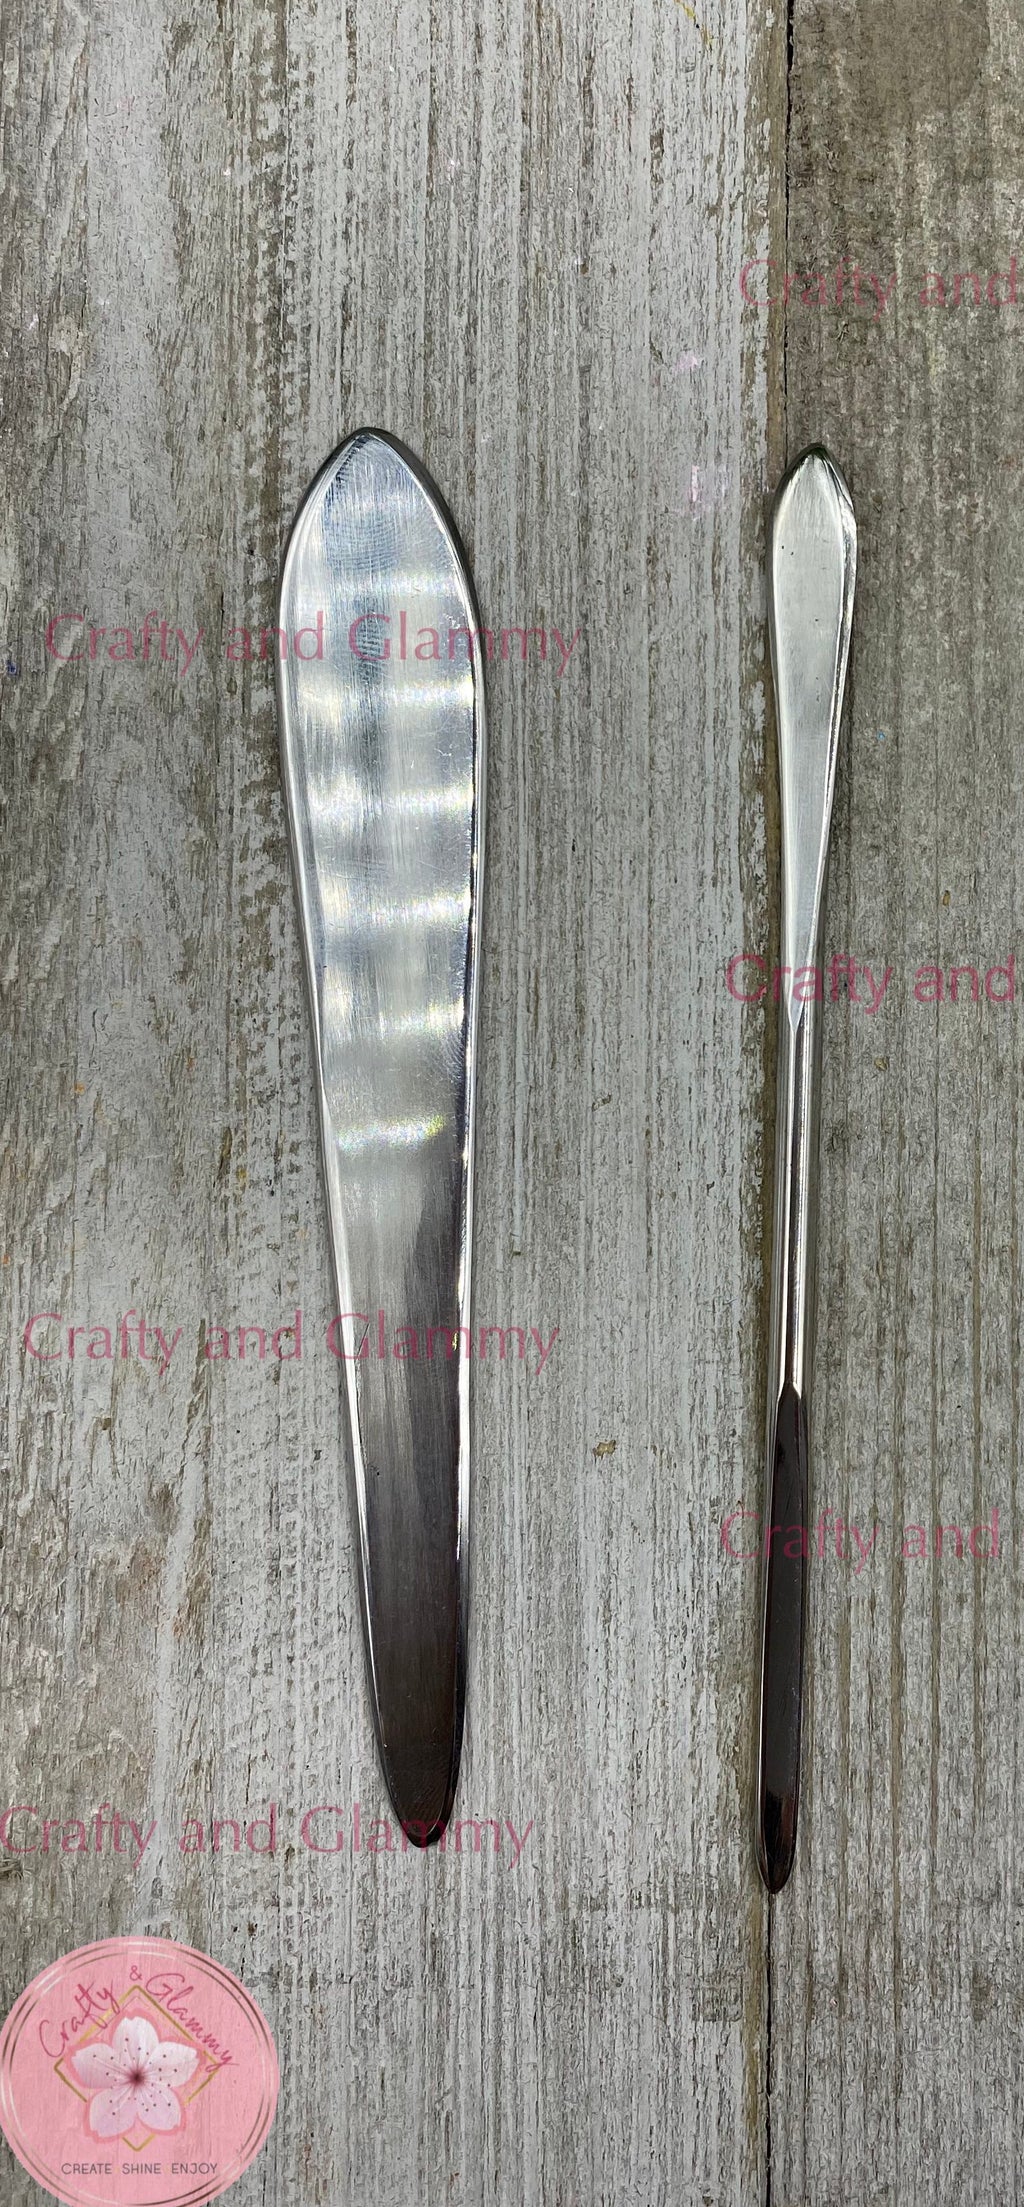 Stainless Steel tools for polymer clay, cold porcelain, modeling clay, sculpting, wax, soap, herramientas acero inoxidable, arcilla polimerica, jabones, escultura